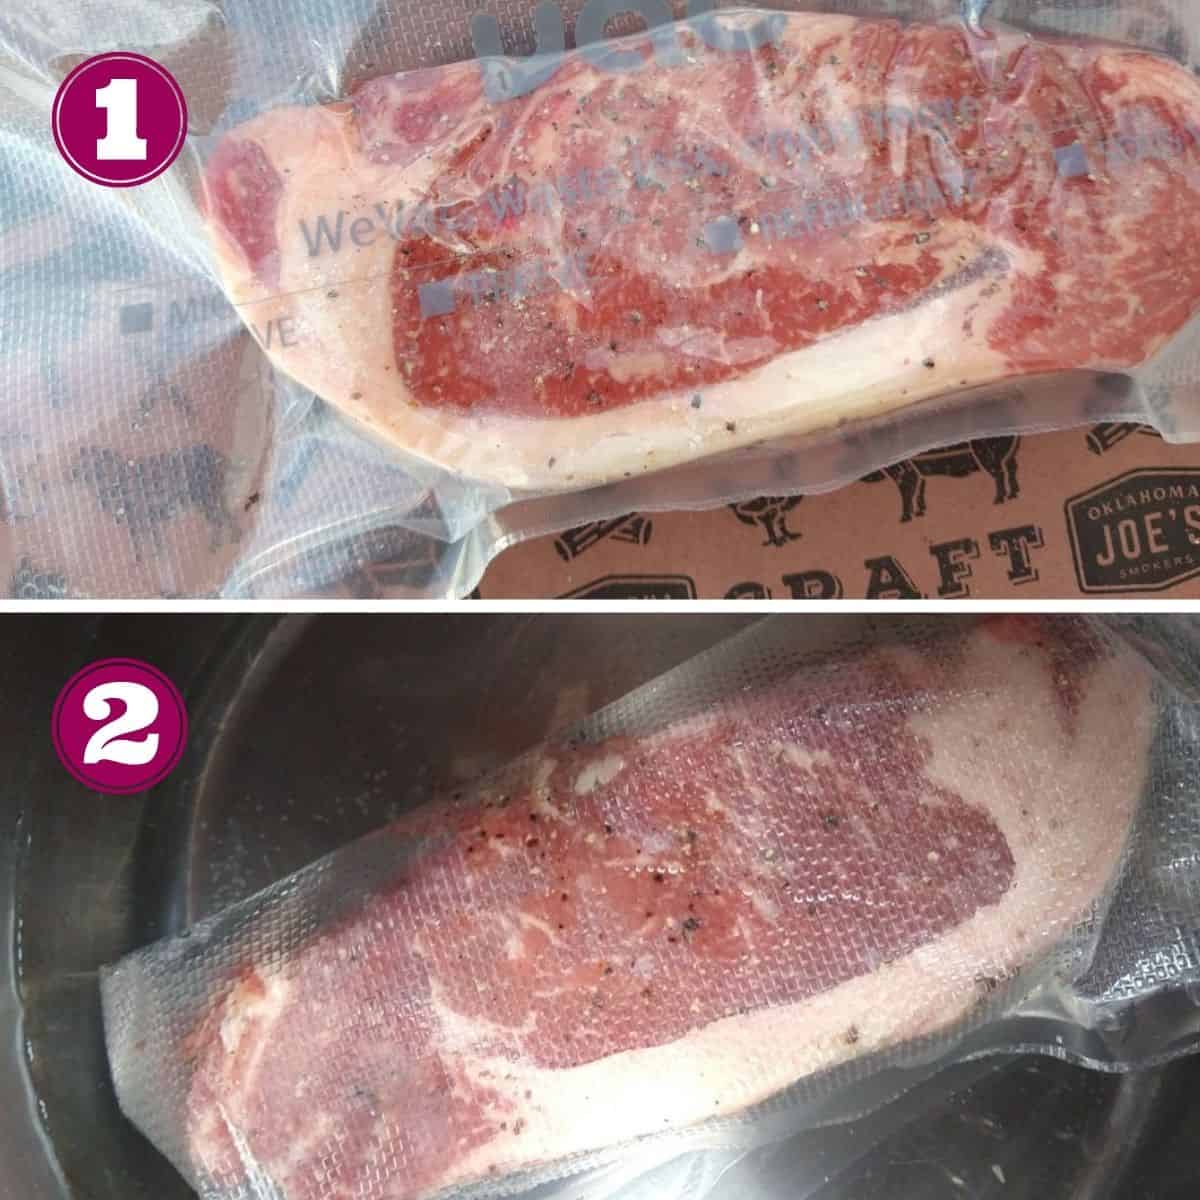 Step 1 shows a New York strip steak in a vacuum sealed bag. 
Step 2 shows the steak in the Instant Pot, covered with water.